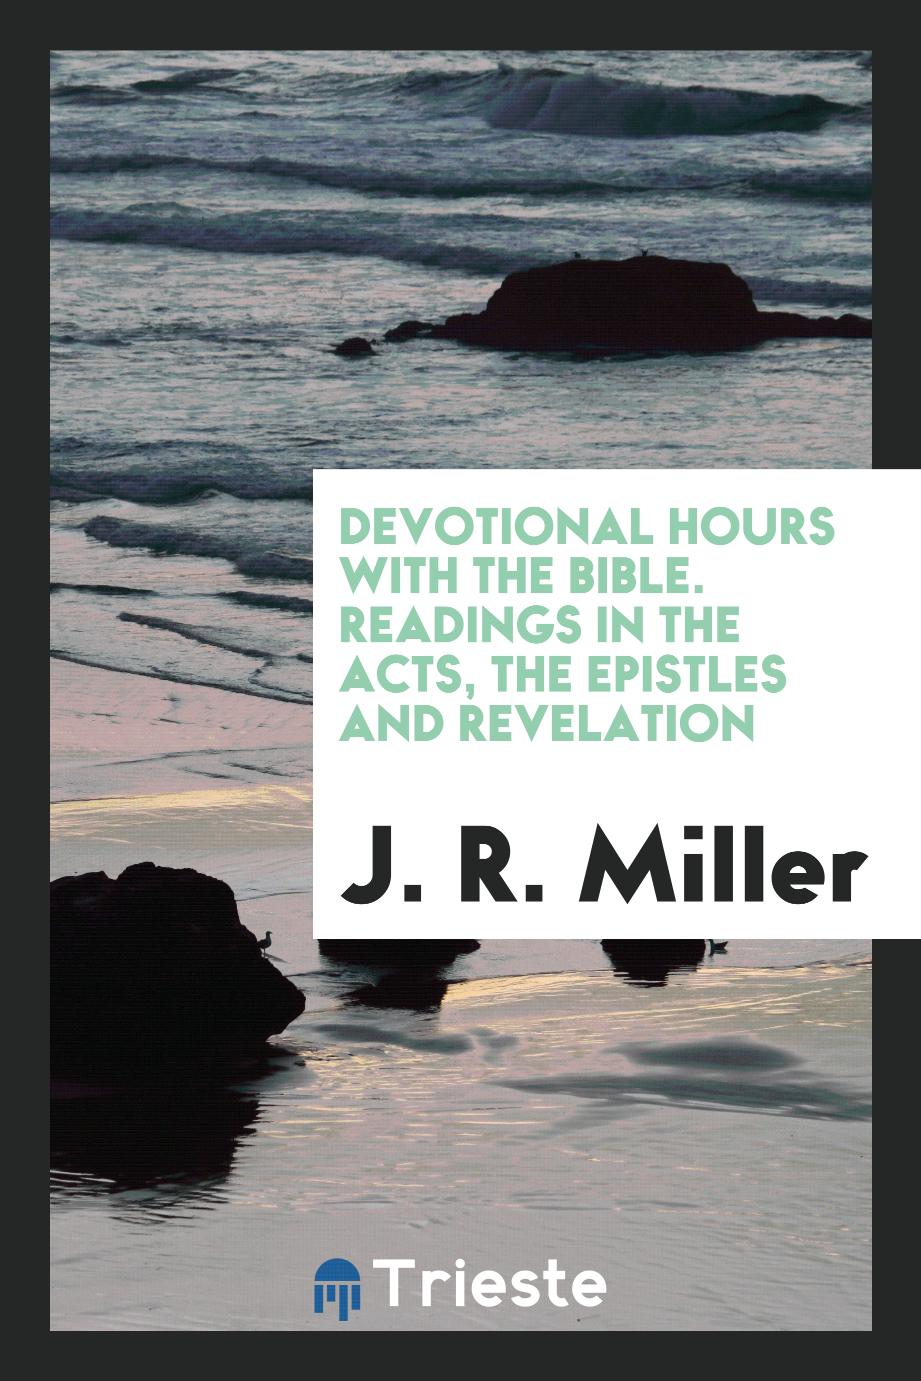 Devotional Hours with the Bible. Readings in the Acts, the Epistles and Revelation